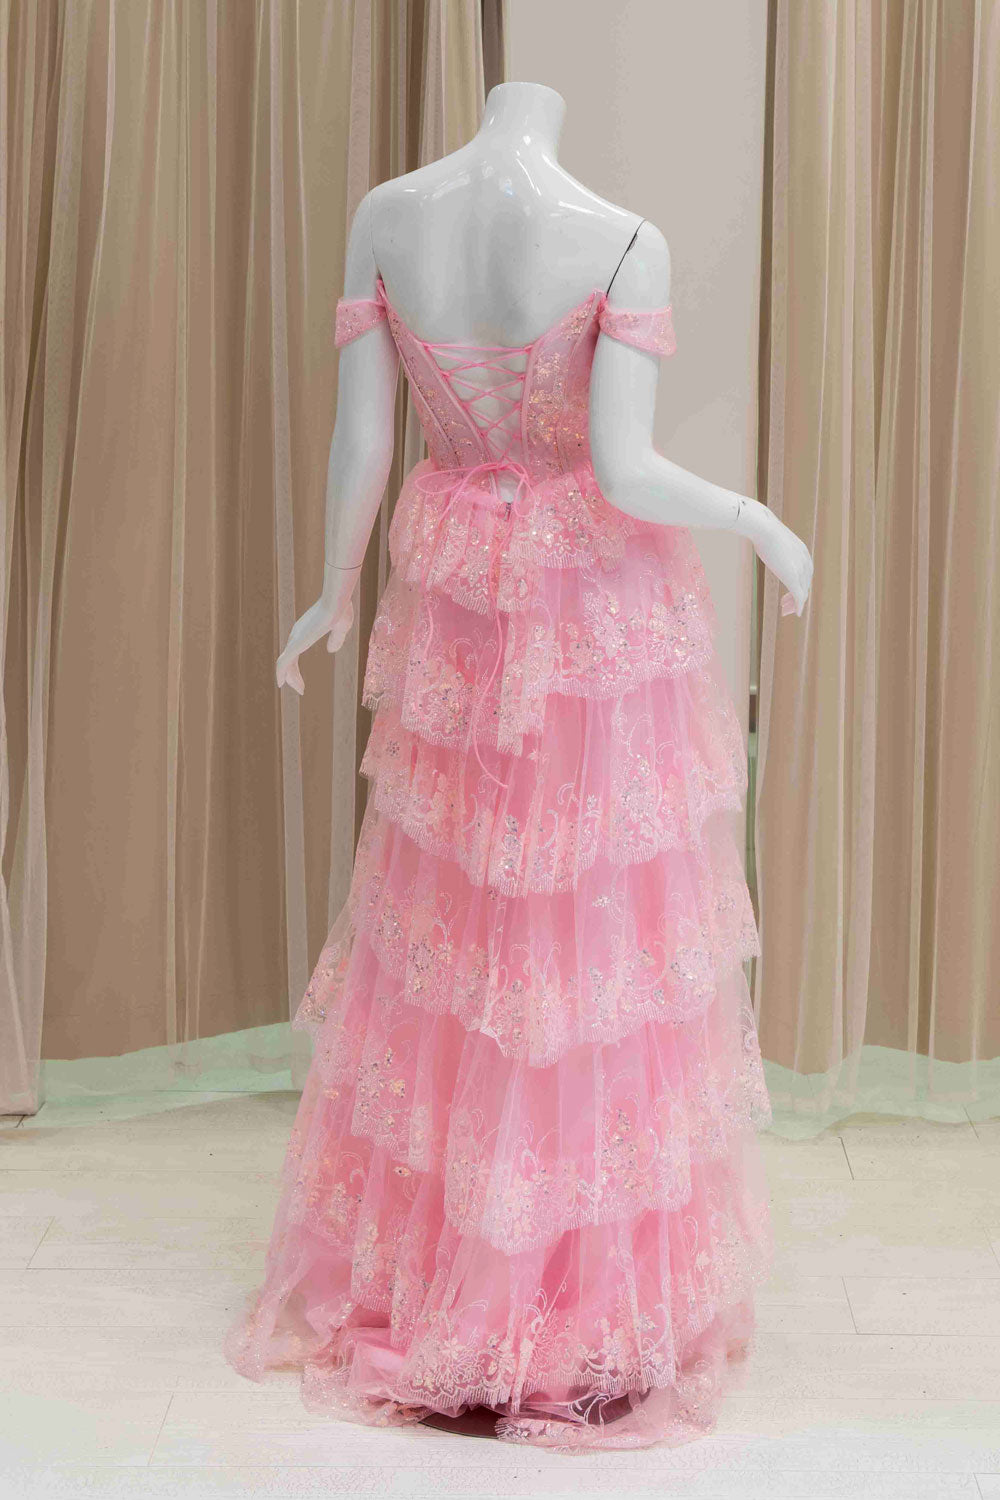 Tiered Skirt Ball Gown for Prom in Pink